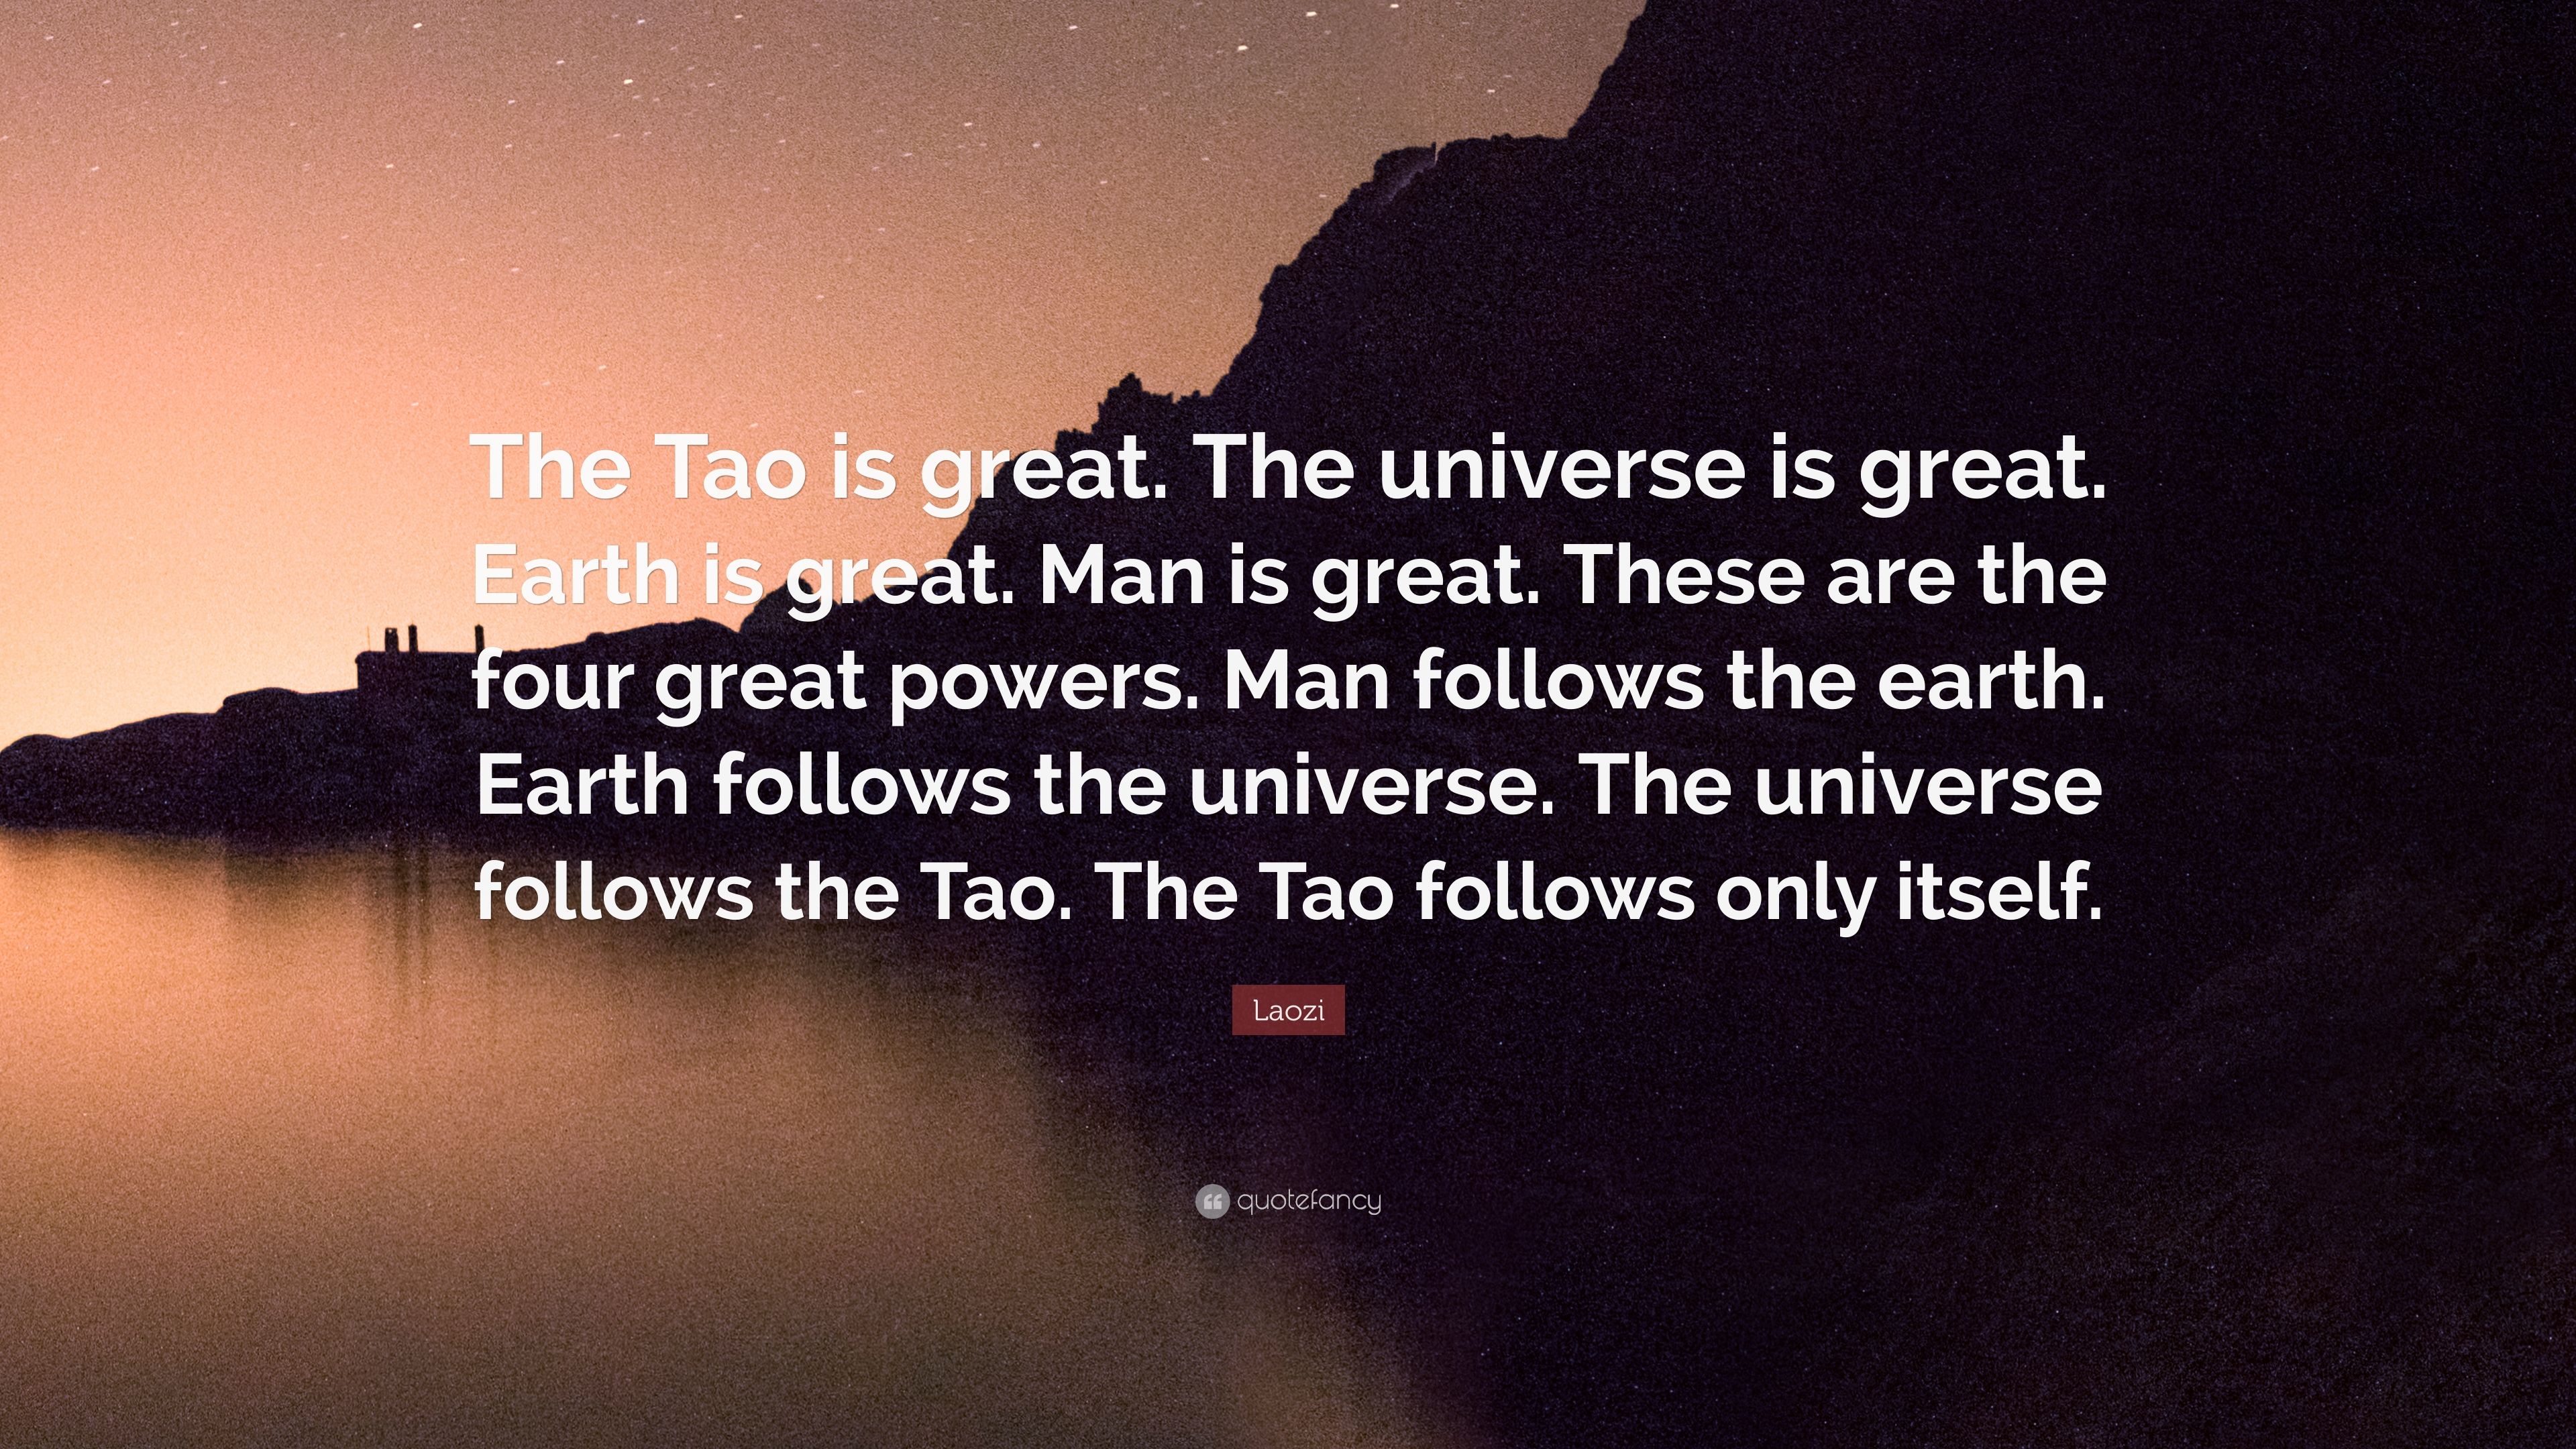 4302007-Laozi-Quote-The-Tao-is-great-The-universe-is-great-Earth-is-great.jpg